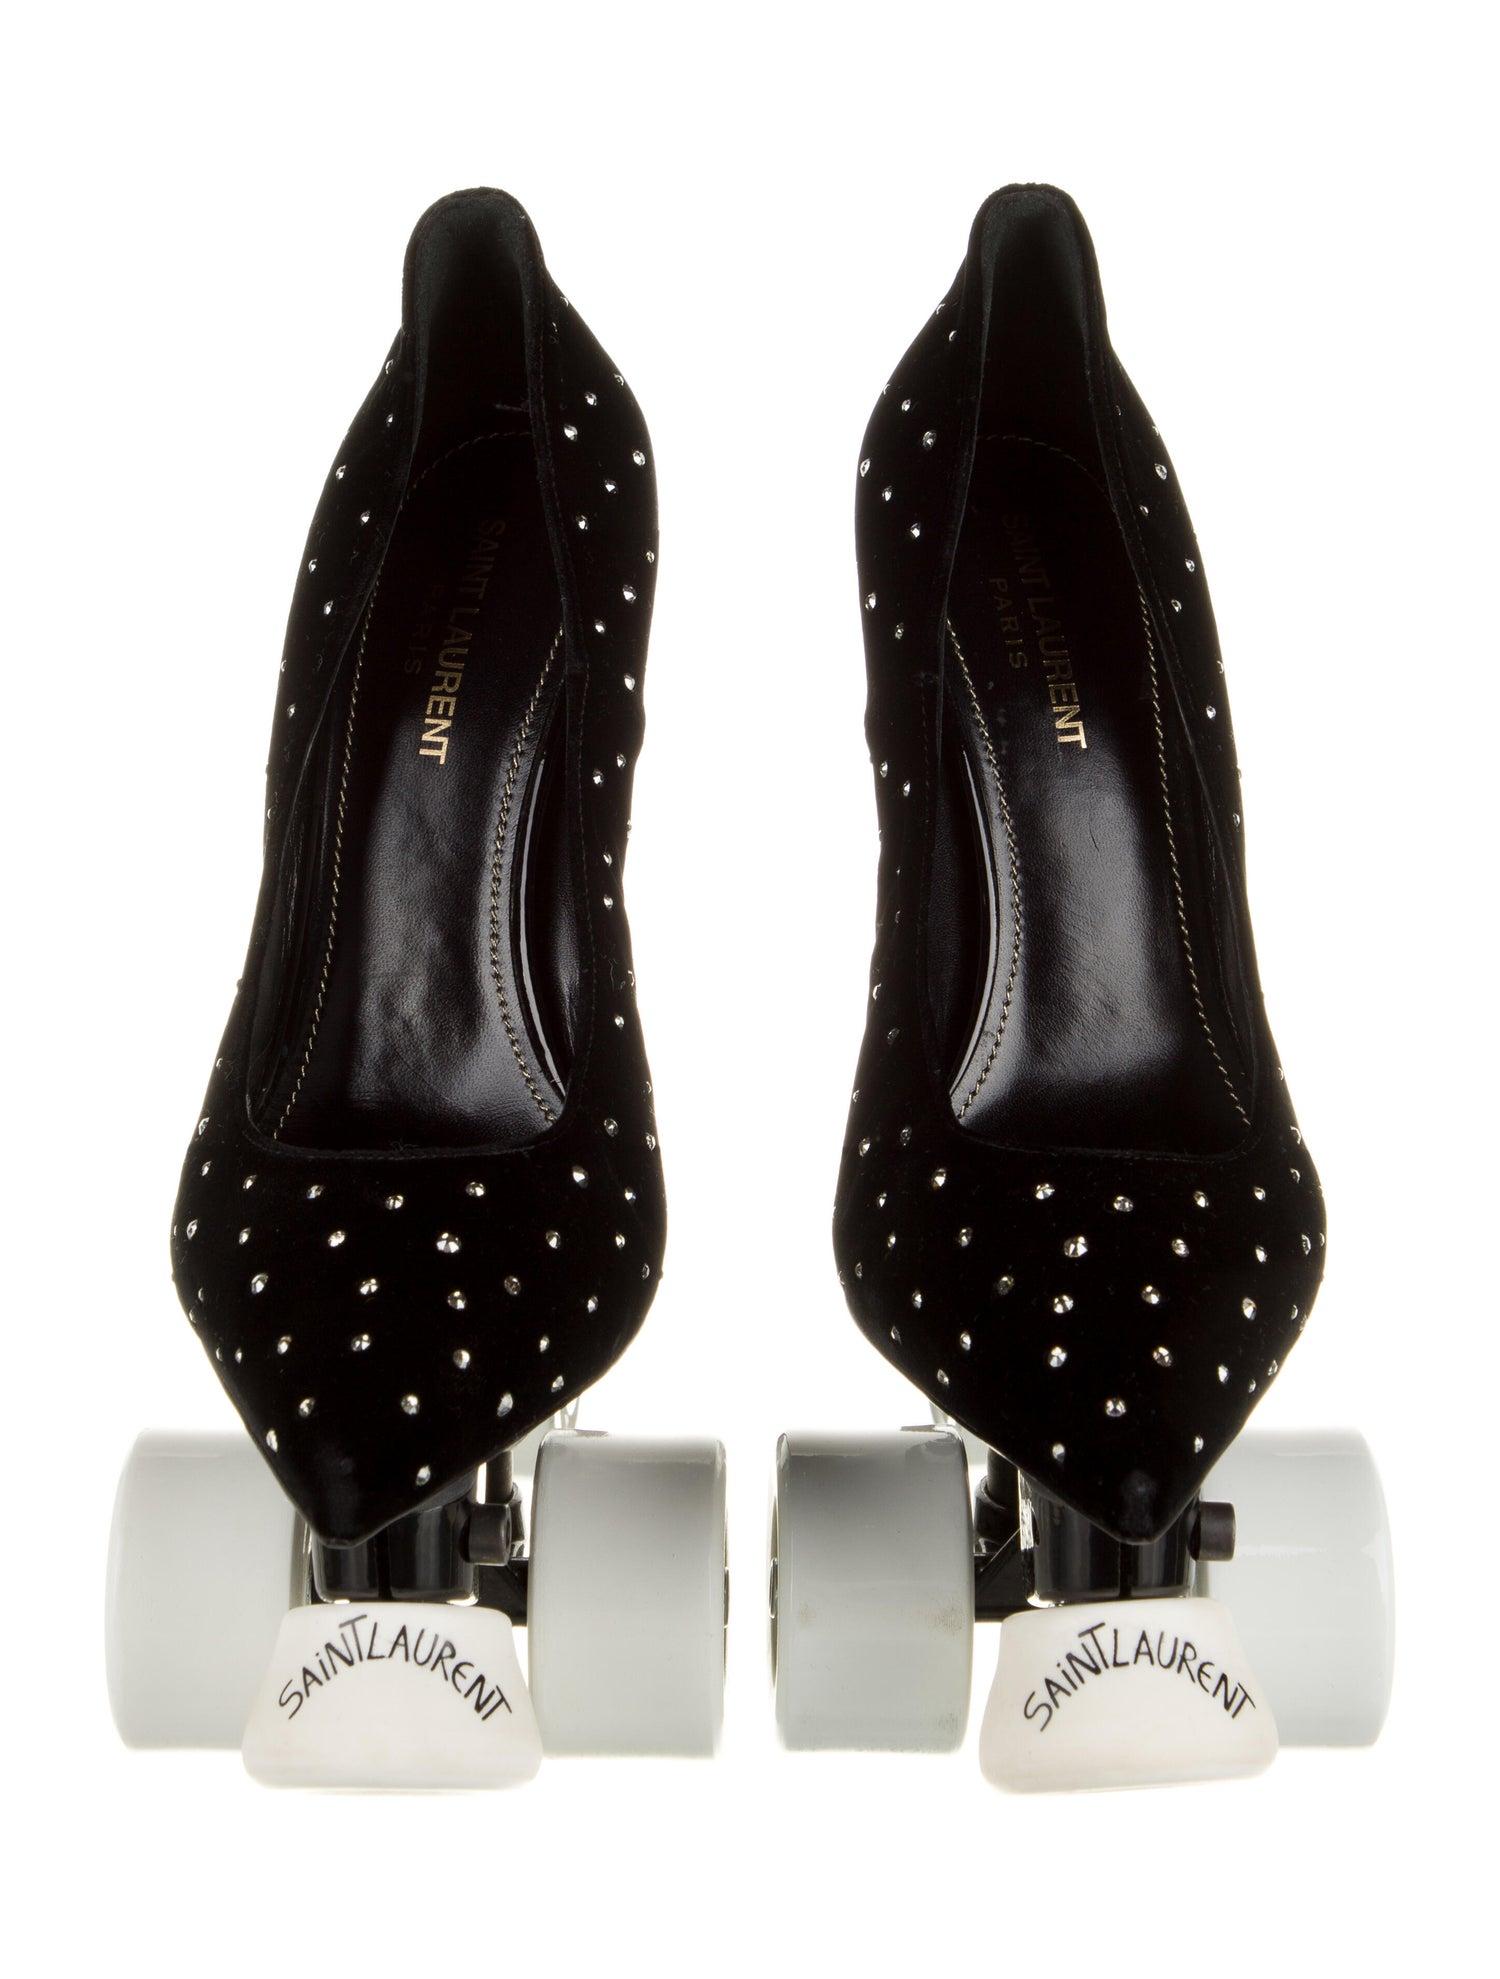 SAINT LAURENT
Pair of black satin Saint Laurent Roller Skate Stiletto decorative objects with white crystal embellishments throughout, silver-tone metal hardware, white plastic wheels at underside, brand logo at front and brand stamp at interior.